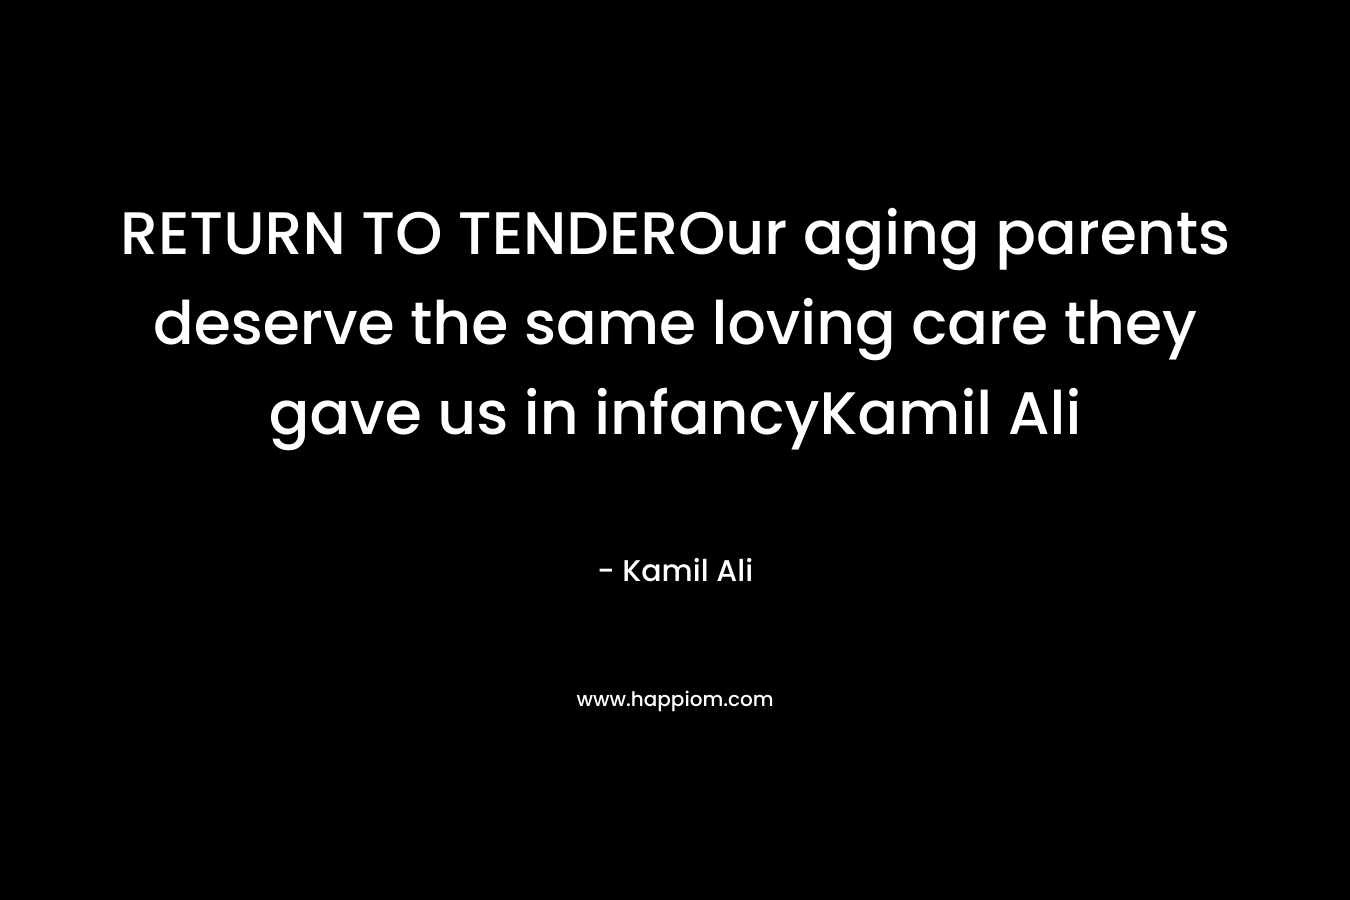 RETURN TO TENDEROur aging parents deserve the same loving care they gave us in infancyKamil Ali